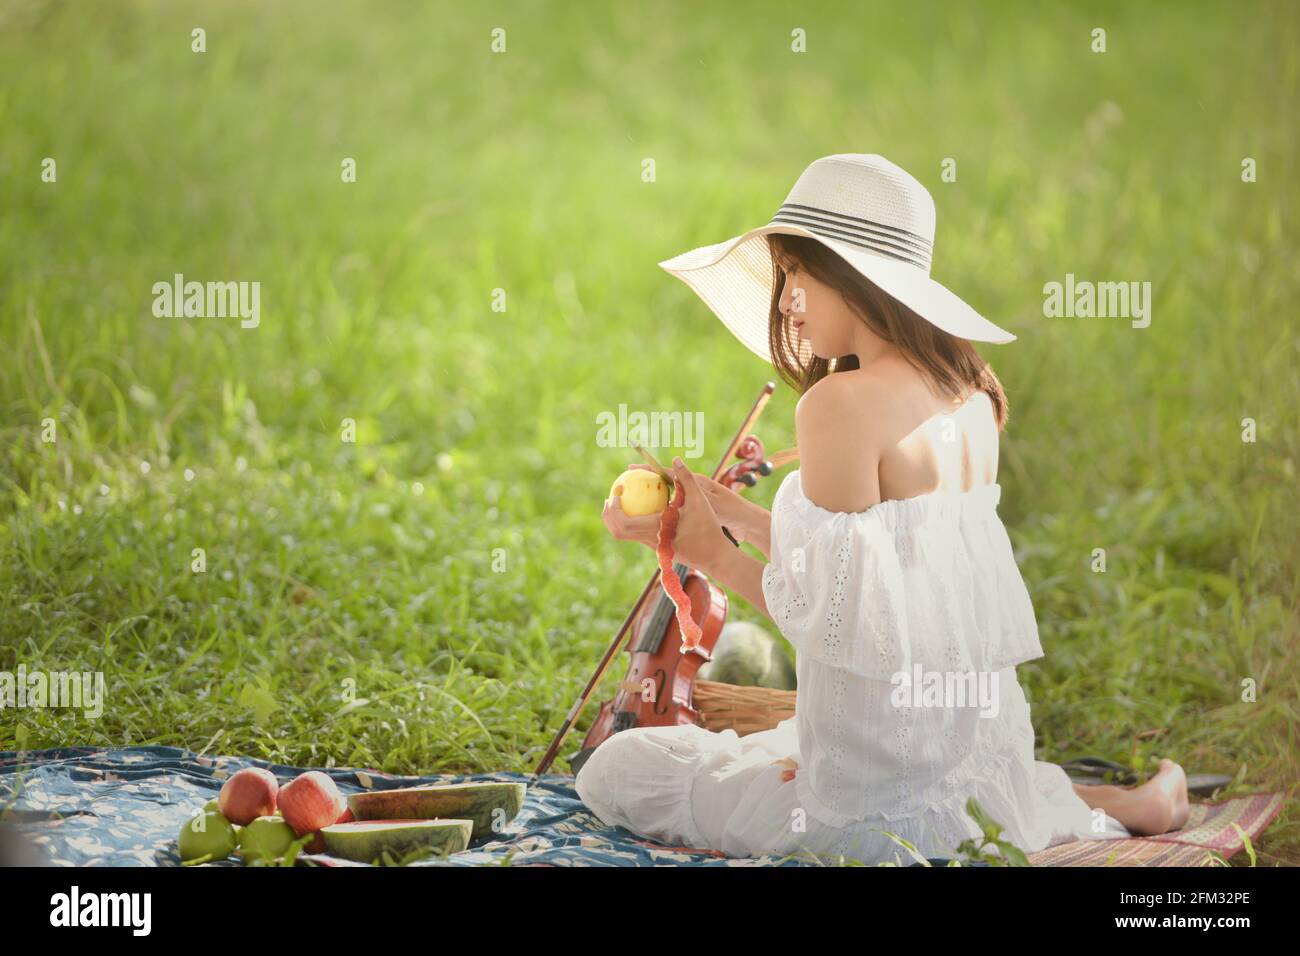 Woman sitting on a picnic blanket peeling an apple, Thailand Stock Photo